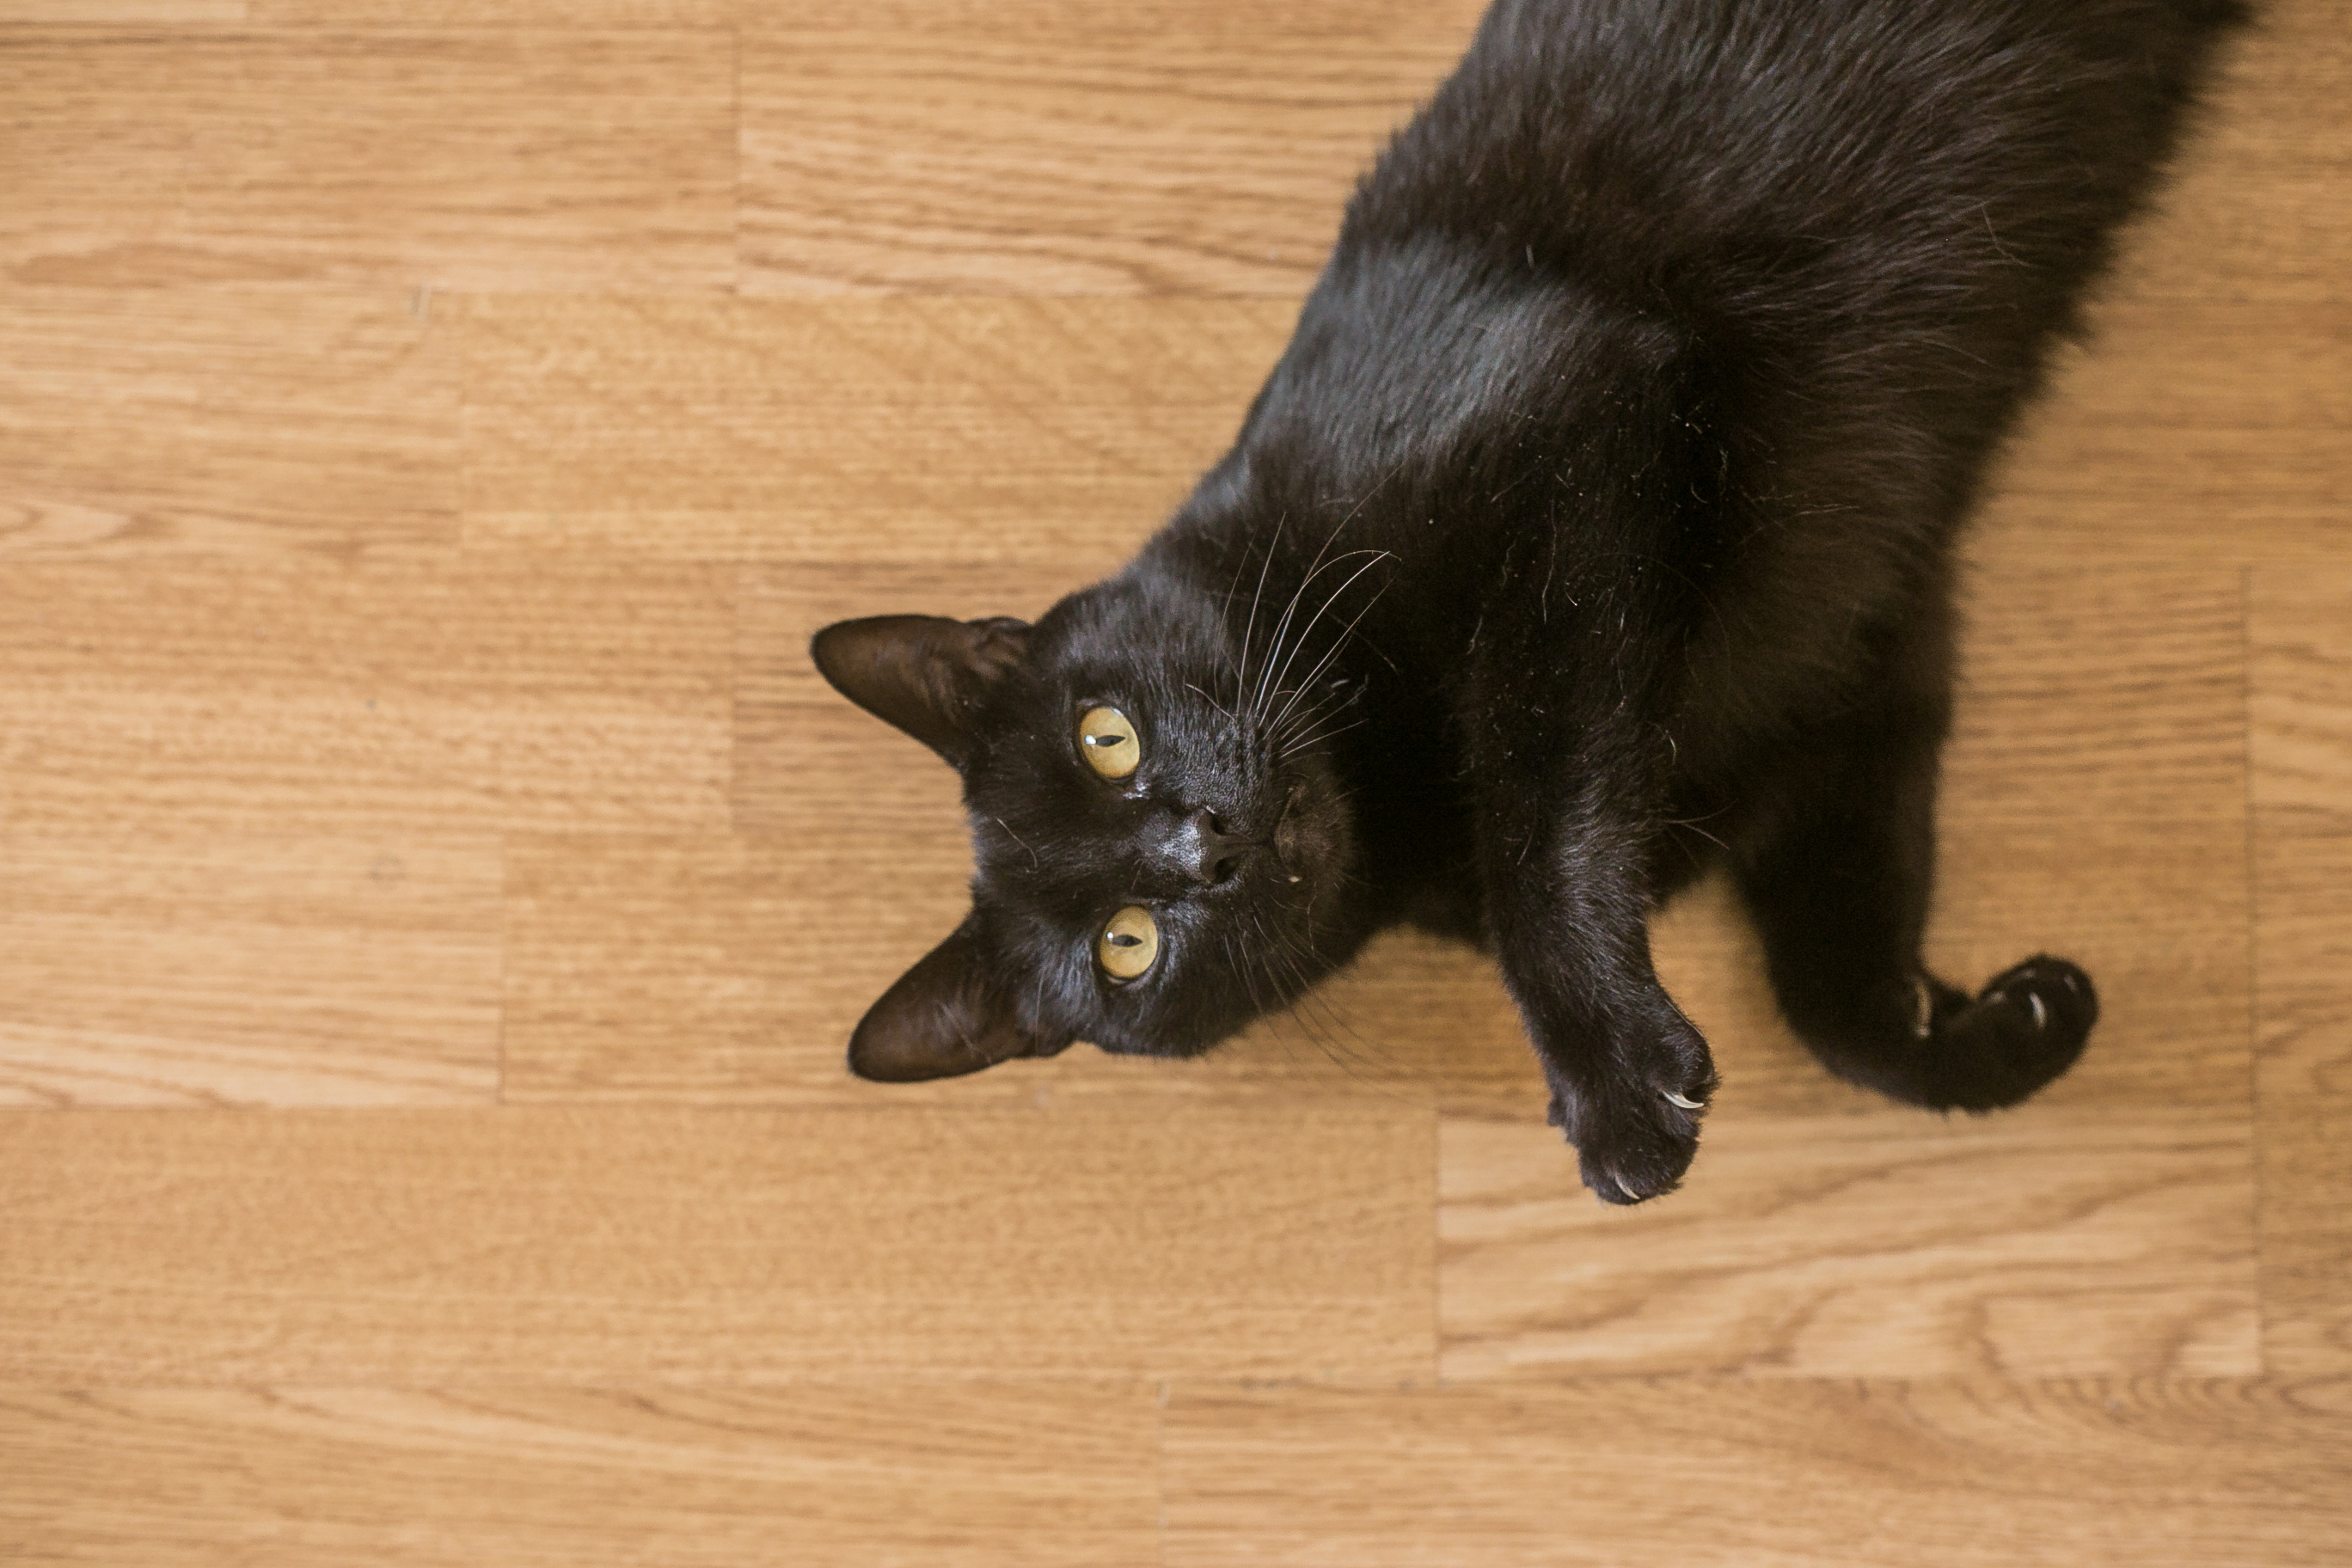 A black cat with yellow eyes lies on a wooden floor, looking up at the camera. One of its front paws is slightly raised, showing its white claws.